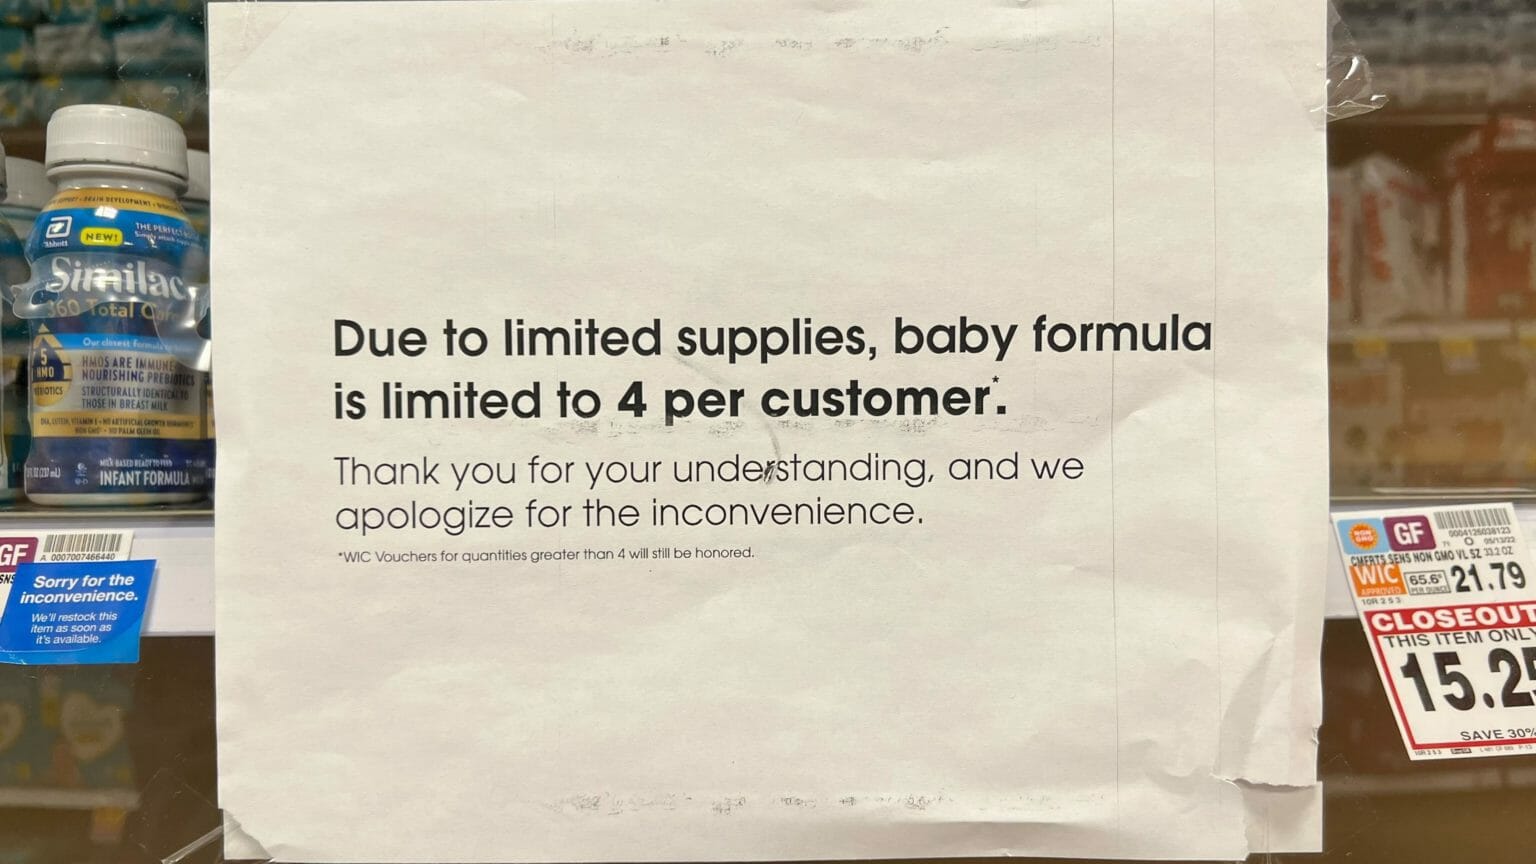 Alaska parents look desperately for baby formula as nationwide shortage persists